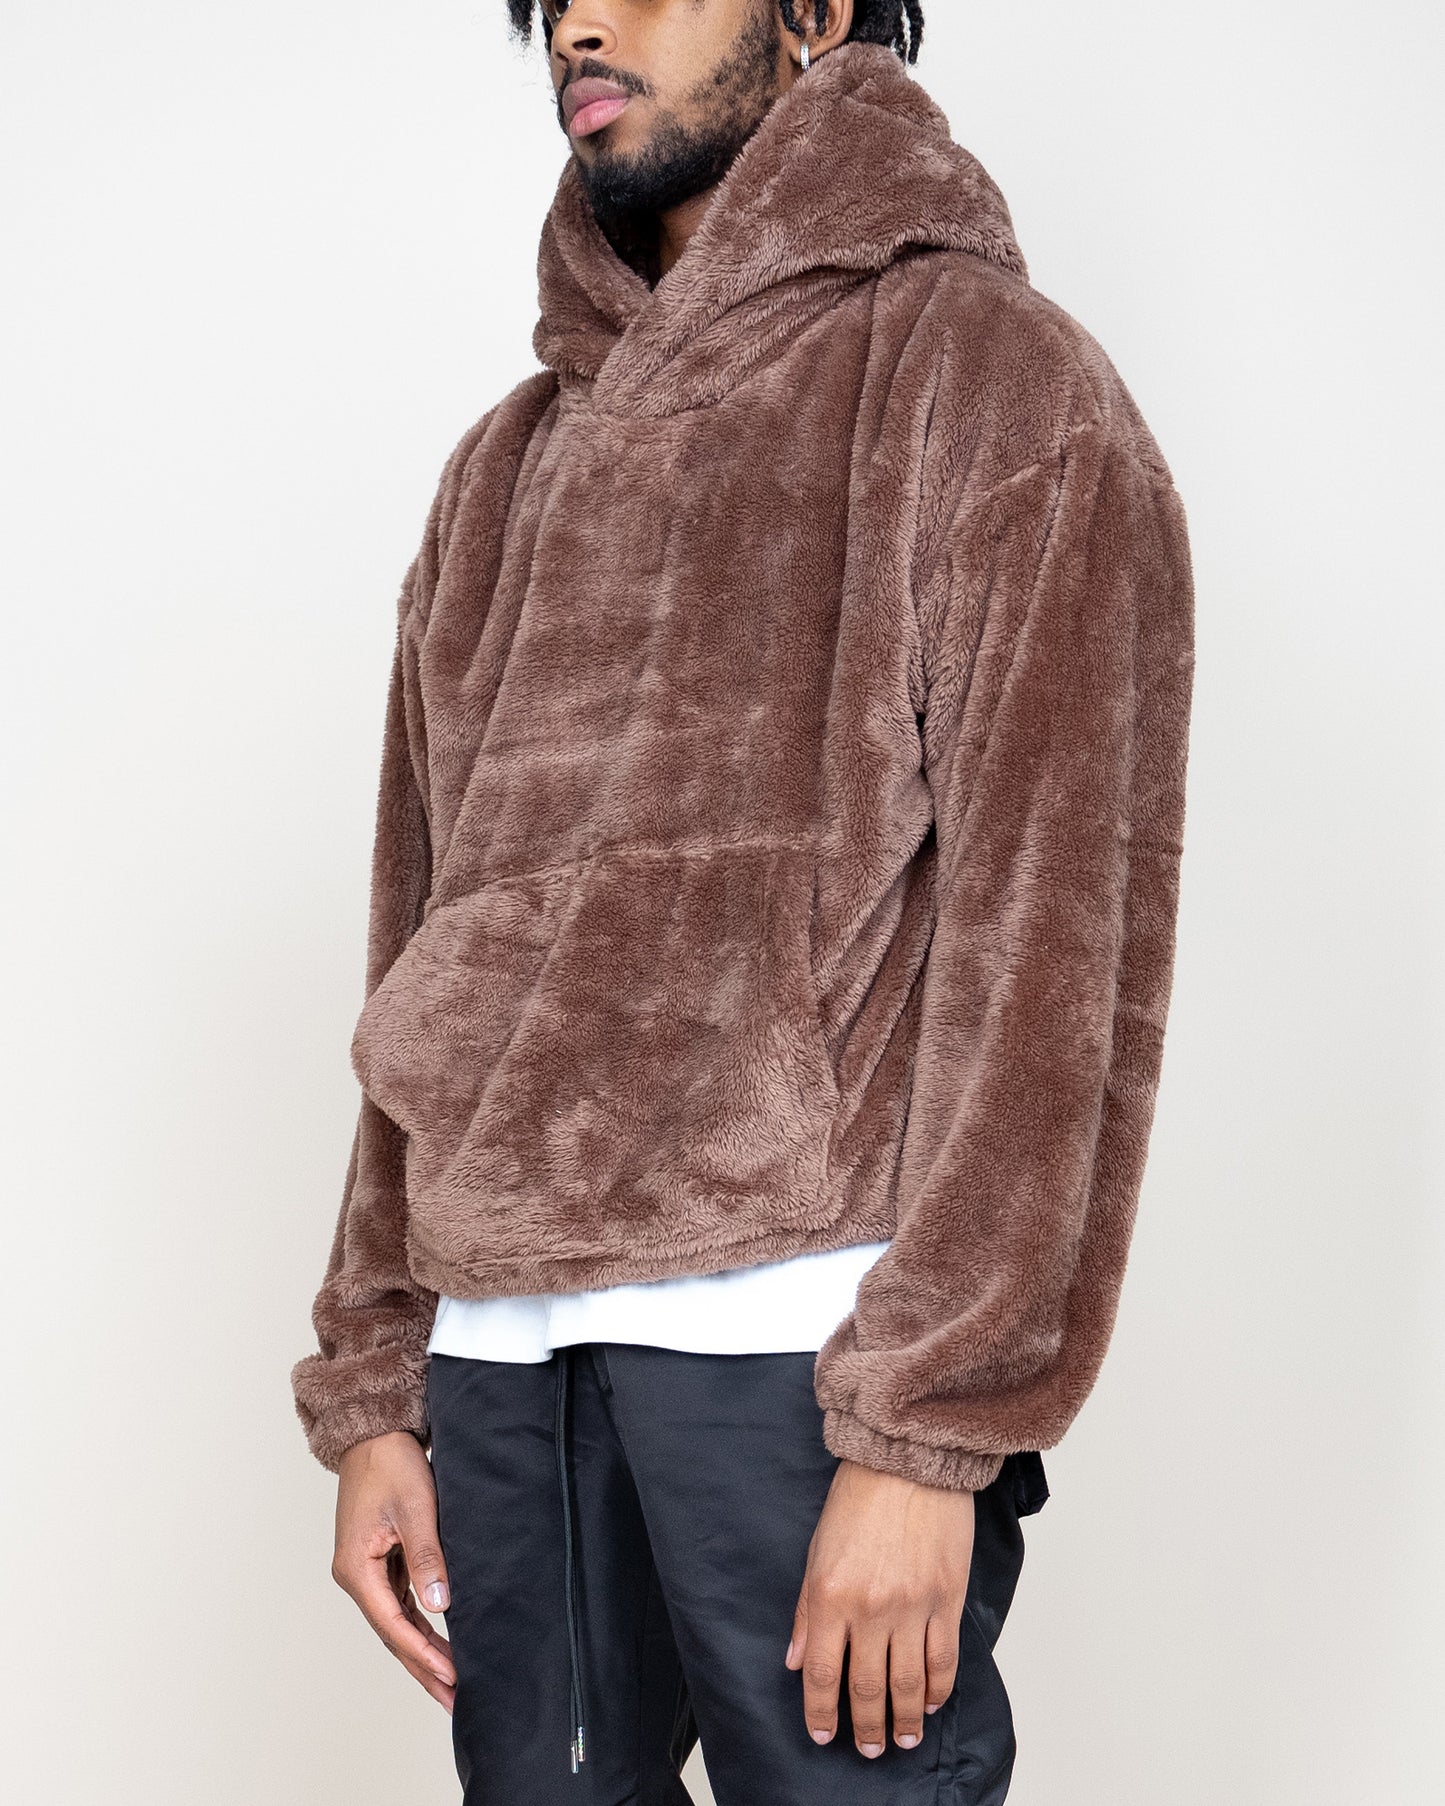 EPTM FUZZY HOODIE-BROWN